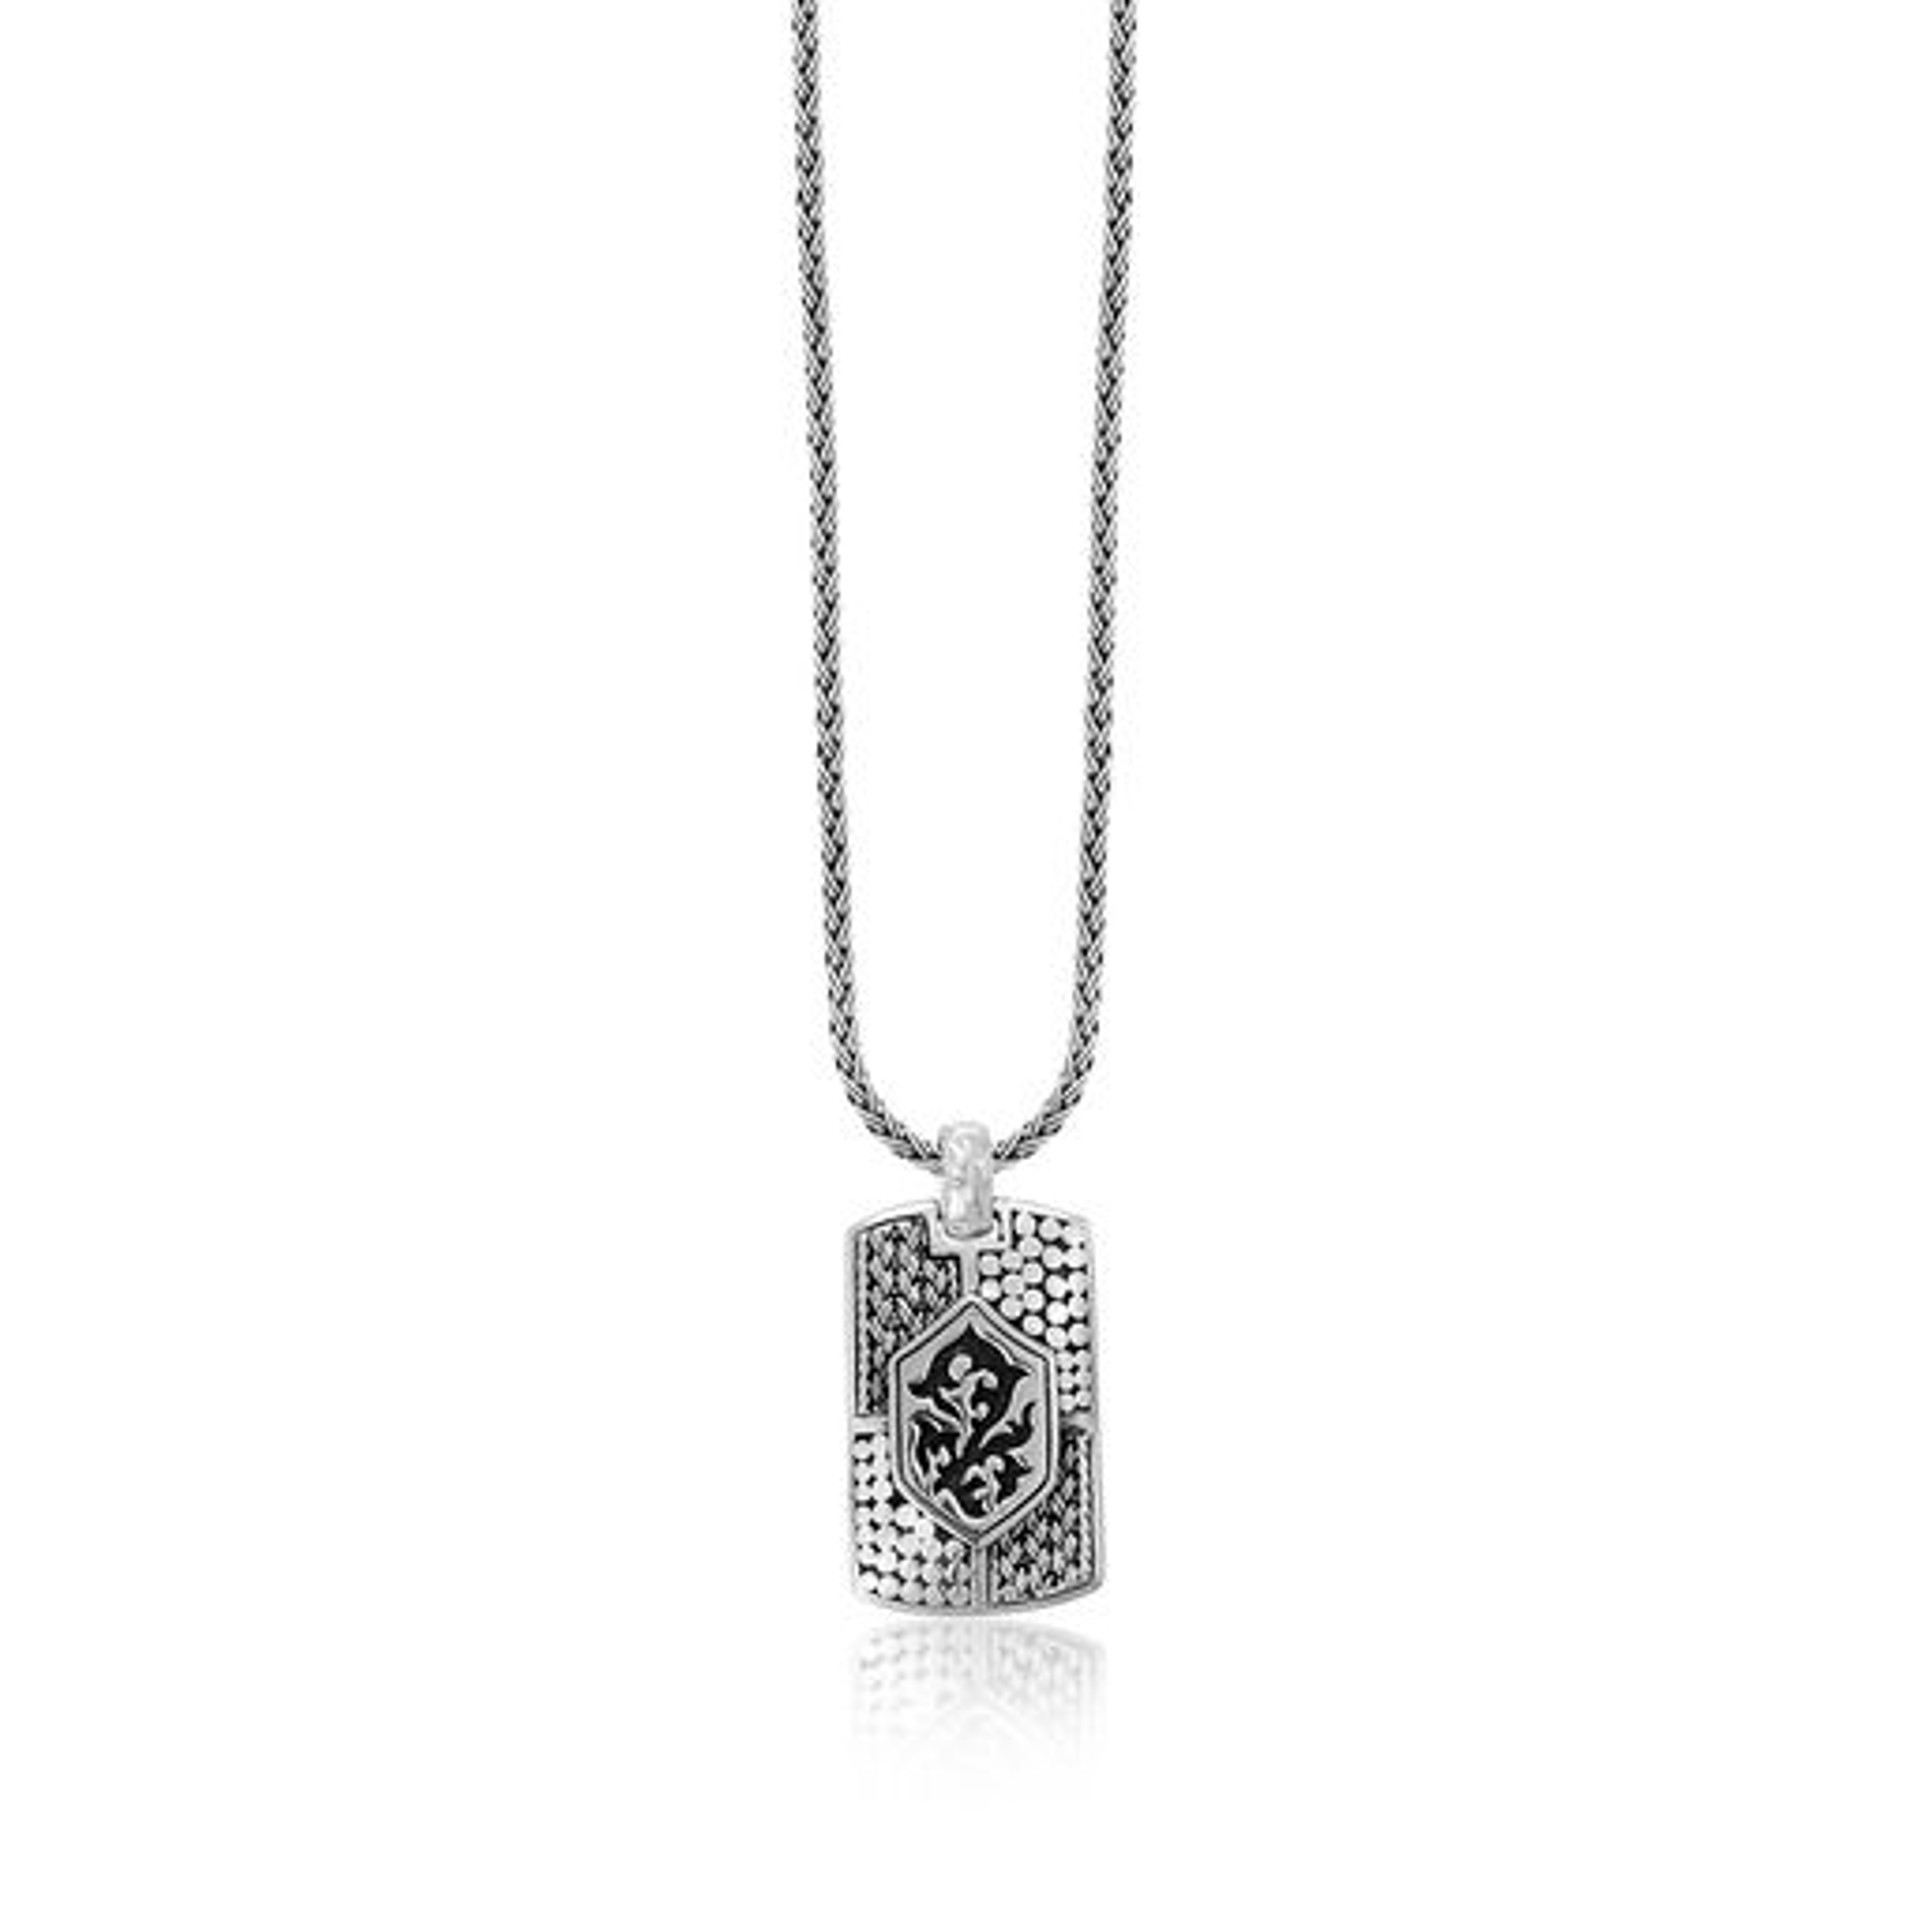 7020 Men's Silver Necklace with Pendant by Lois Hill